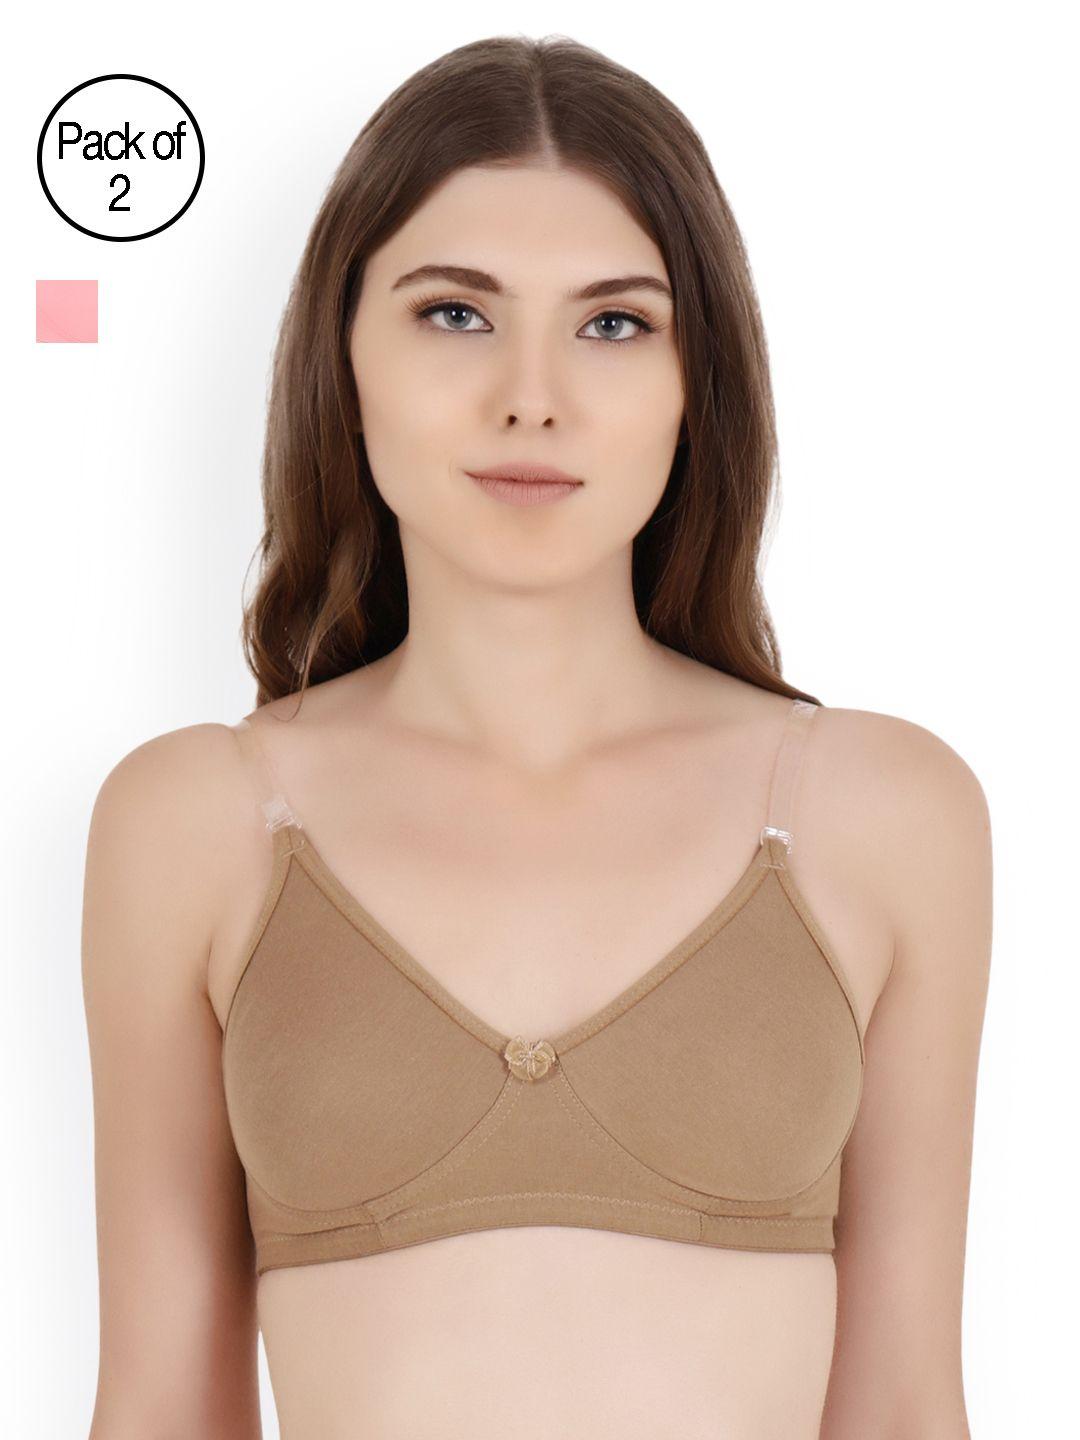 floret-pack-of-two-solid-seamless-non-padded-t-shirt-bras